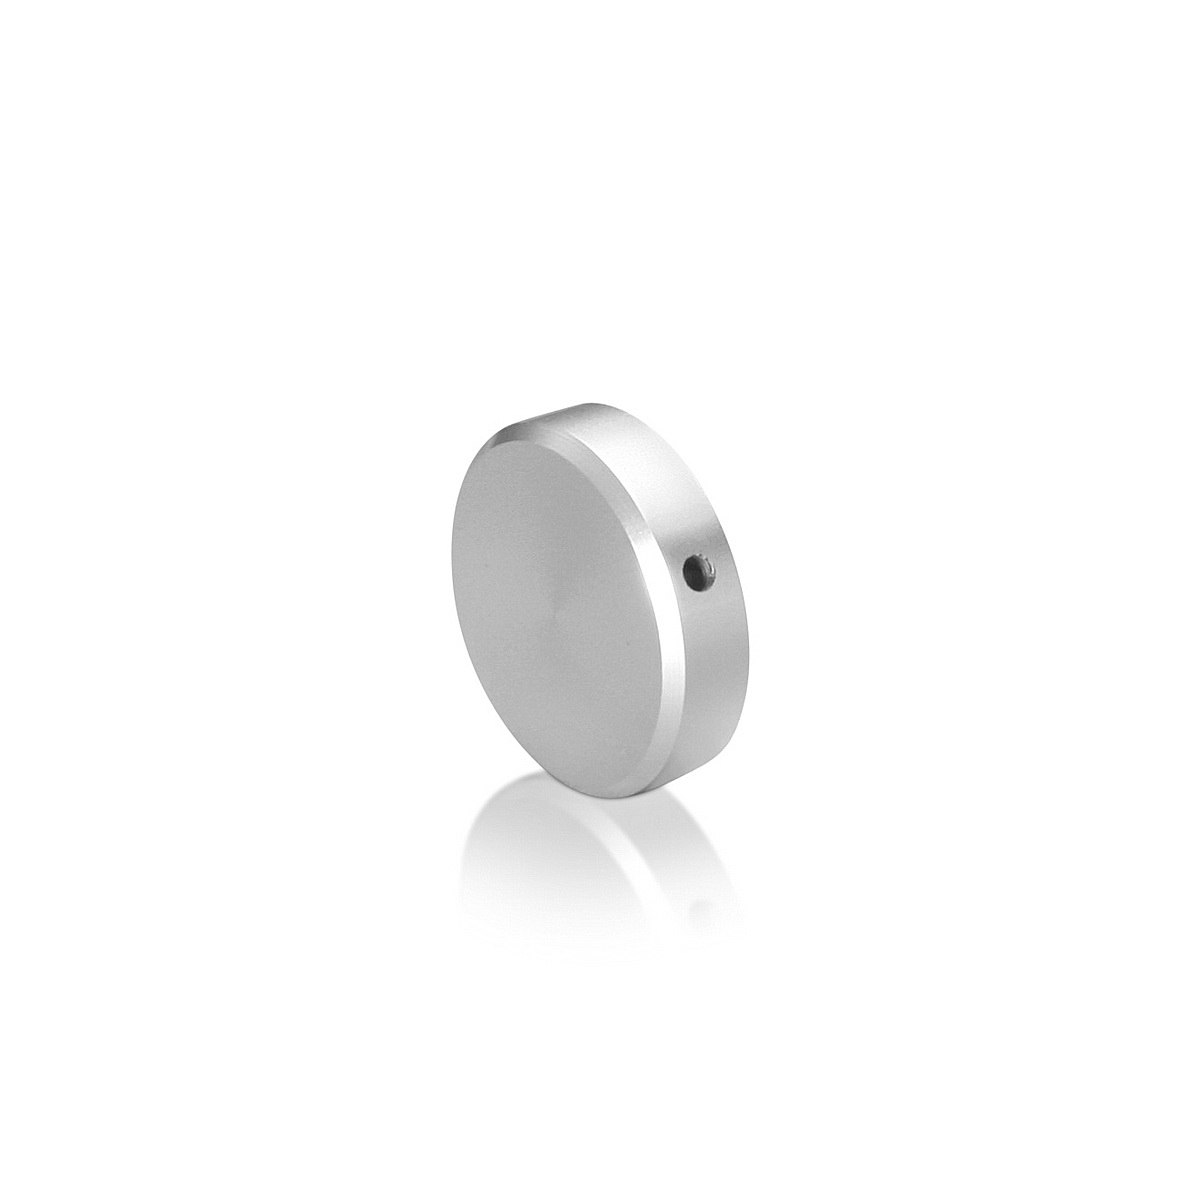 1/4-20 Threaded Locking Caps Diameter. 1'', Height 1/4'', Clear Anodized Aluminum [Required Material Hole Size: 5/16'']